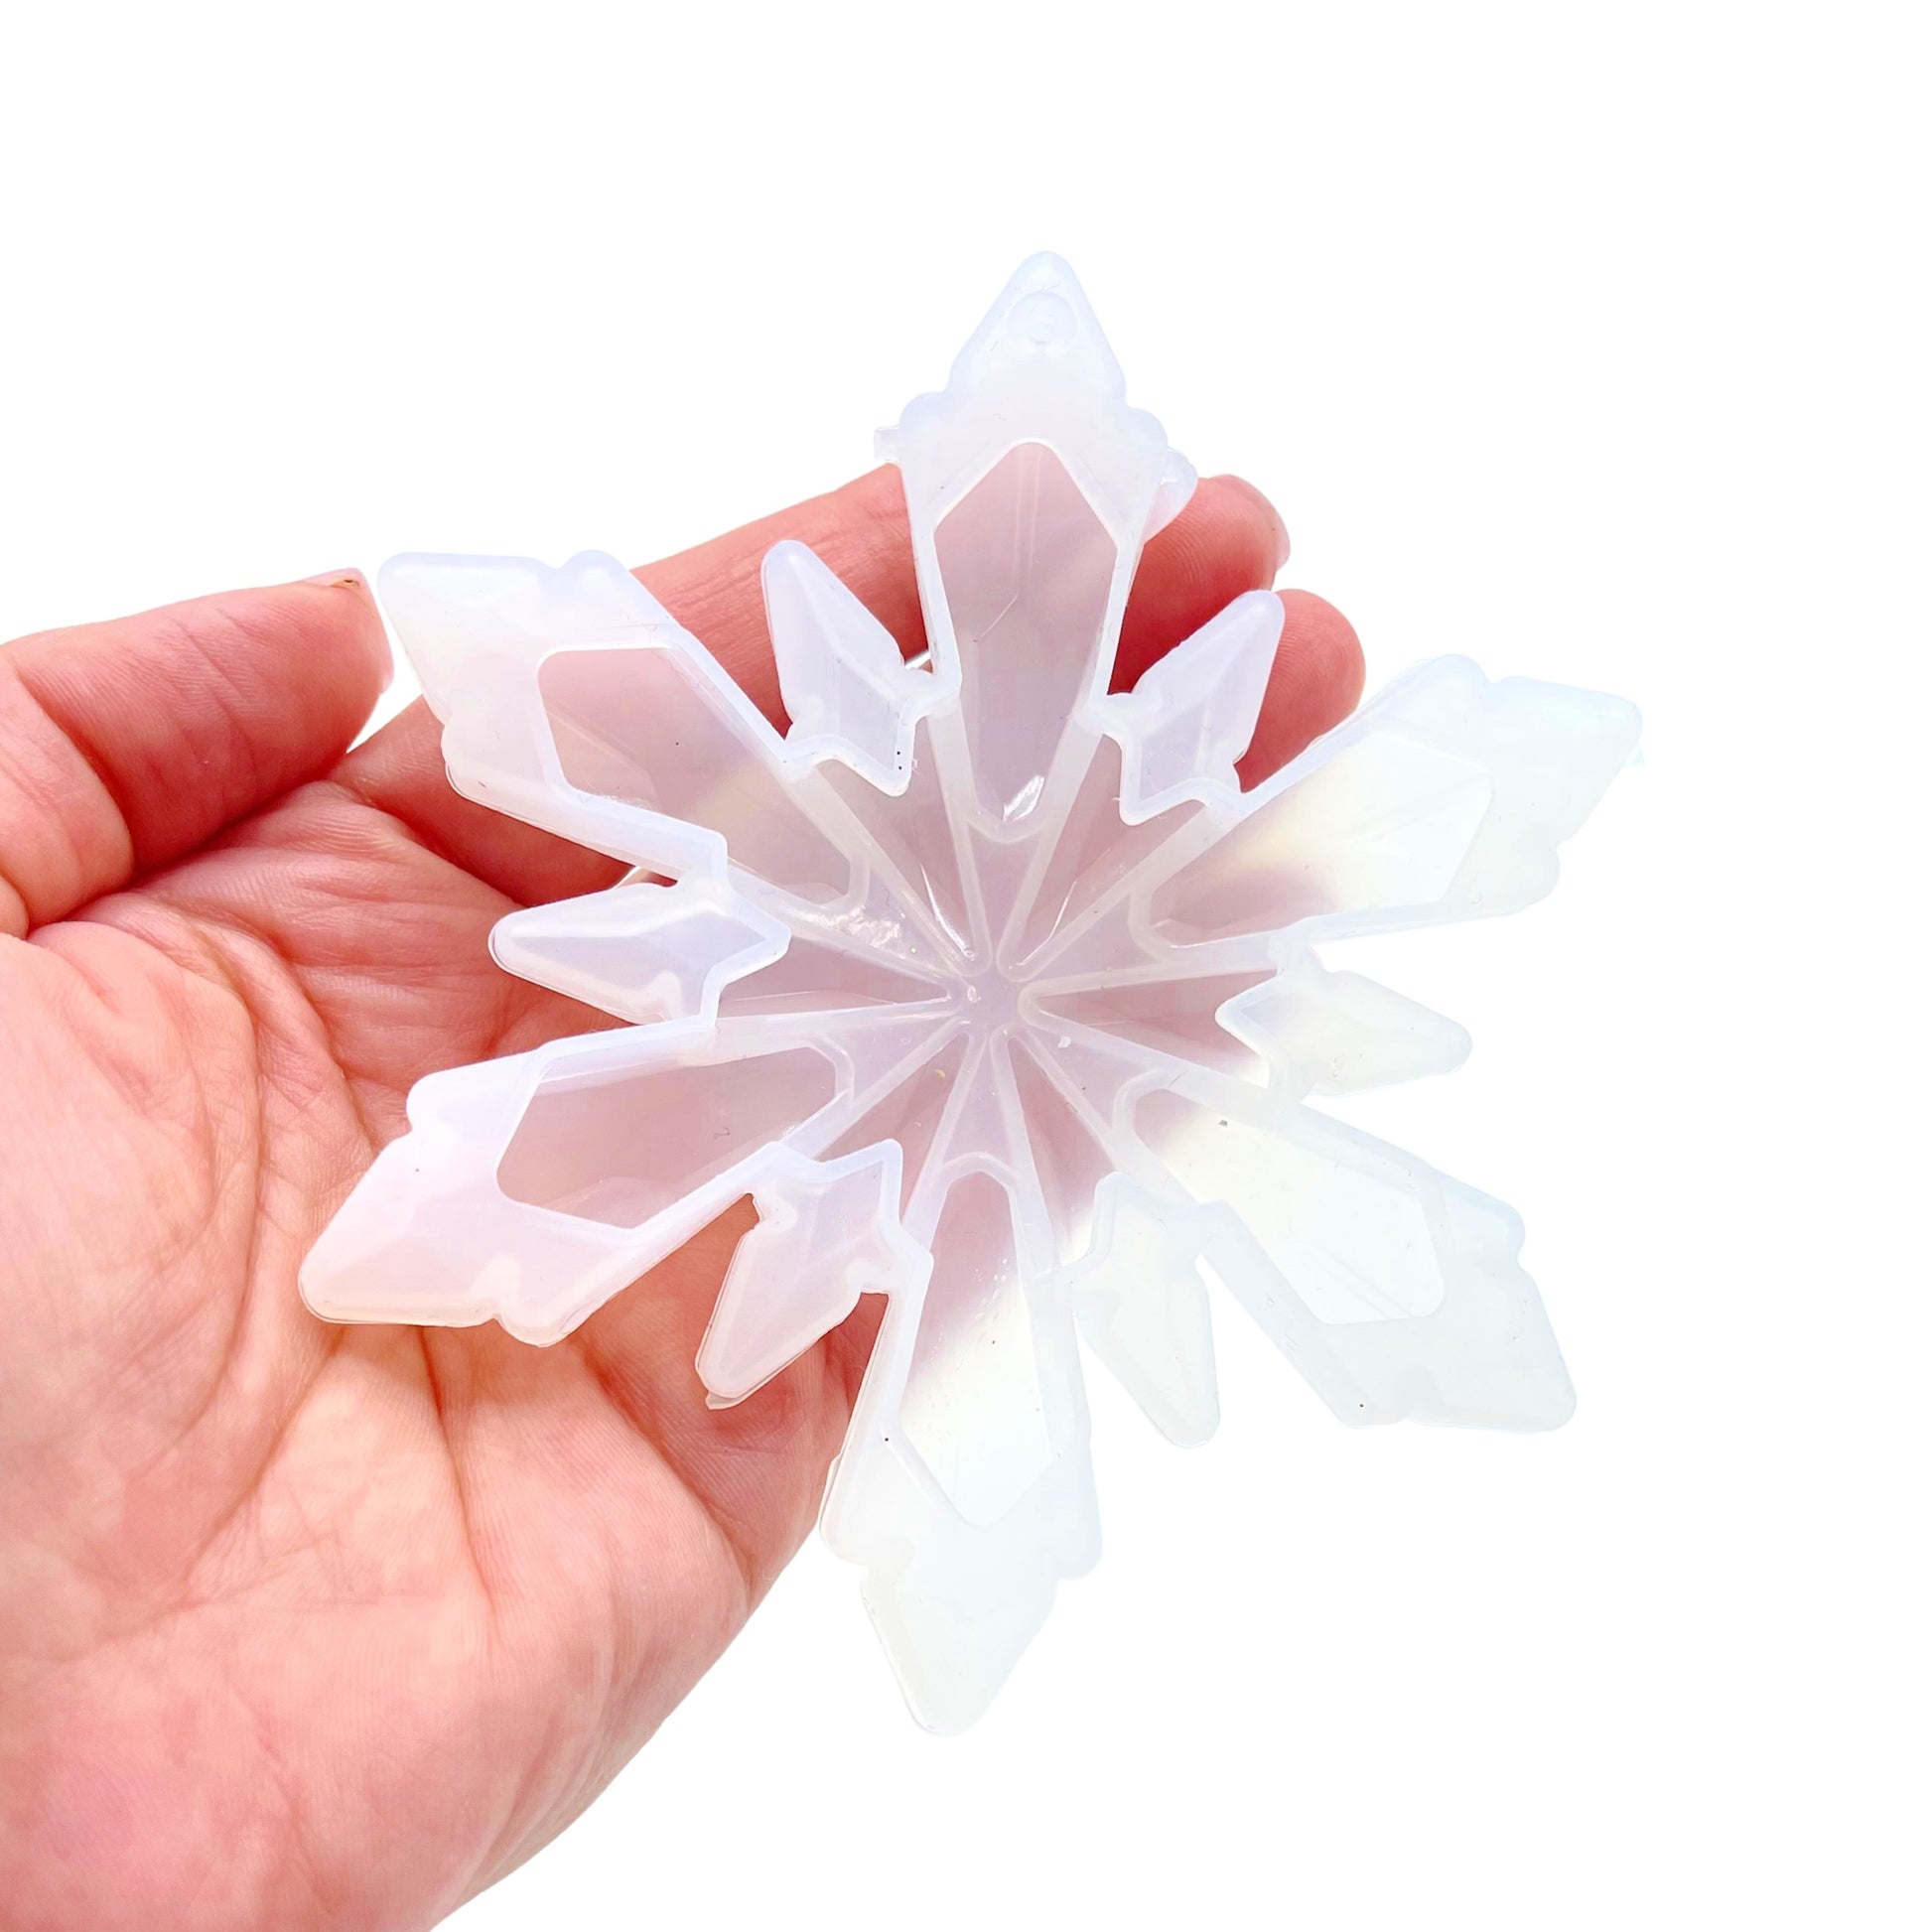 Silicone Resin Snowflake Mold Review 